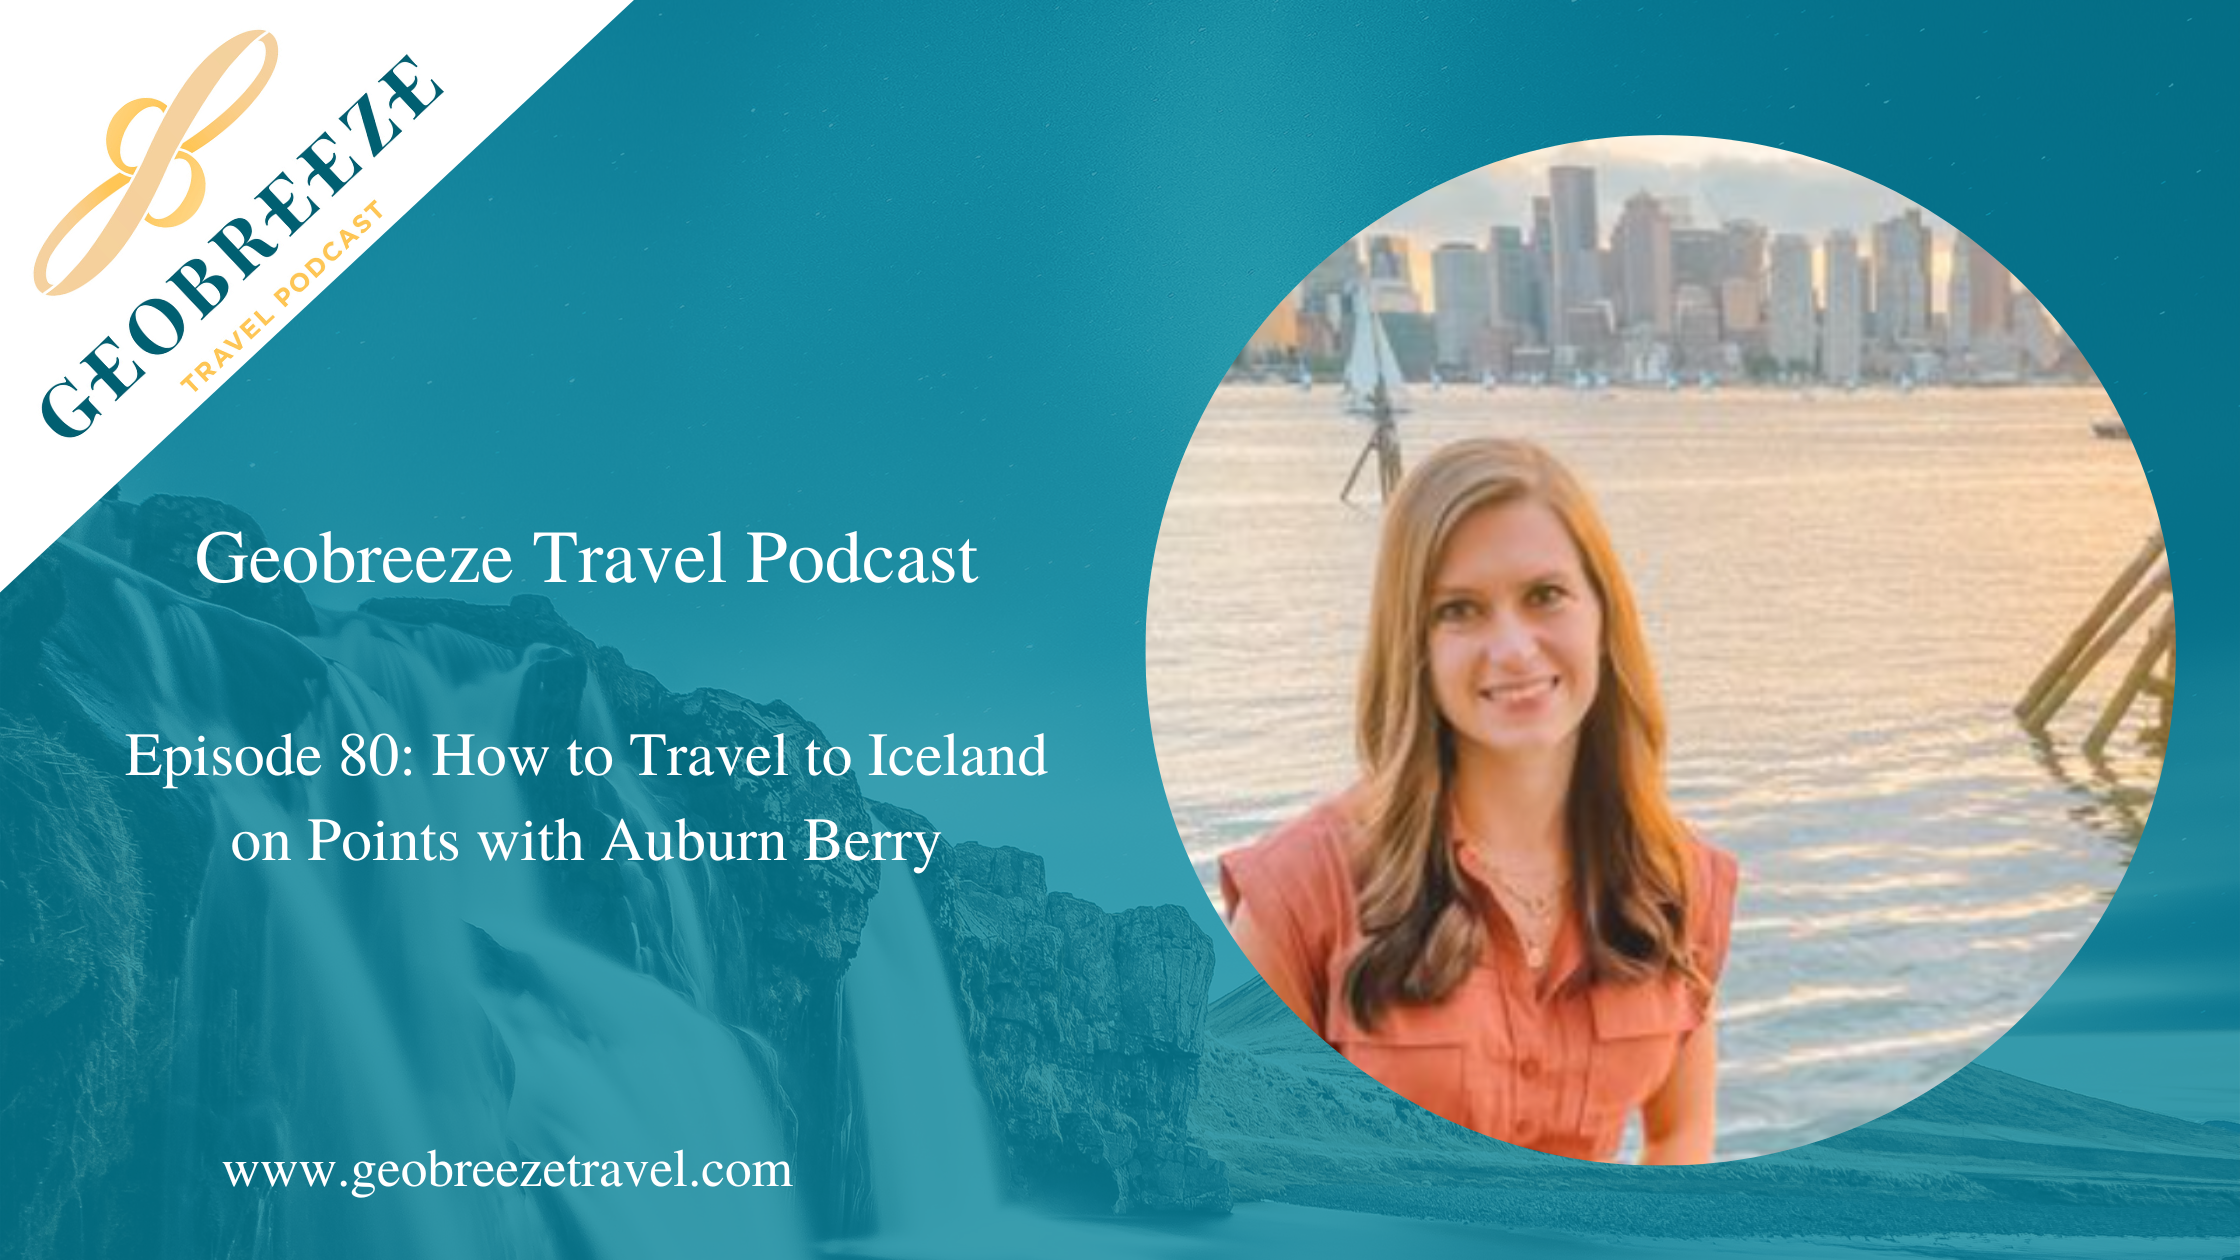 Episode 80: How to Travel to Iceland on Points with Auburn Berry